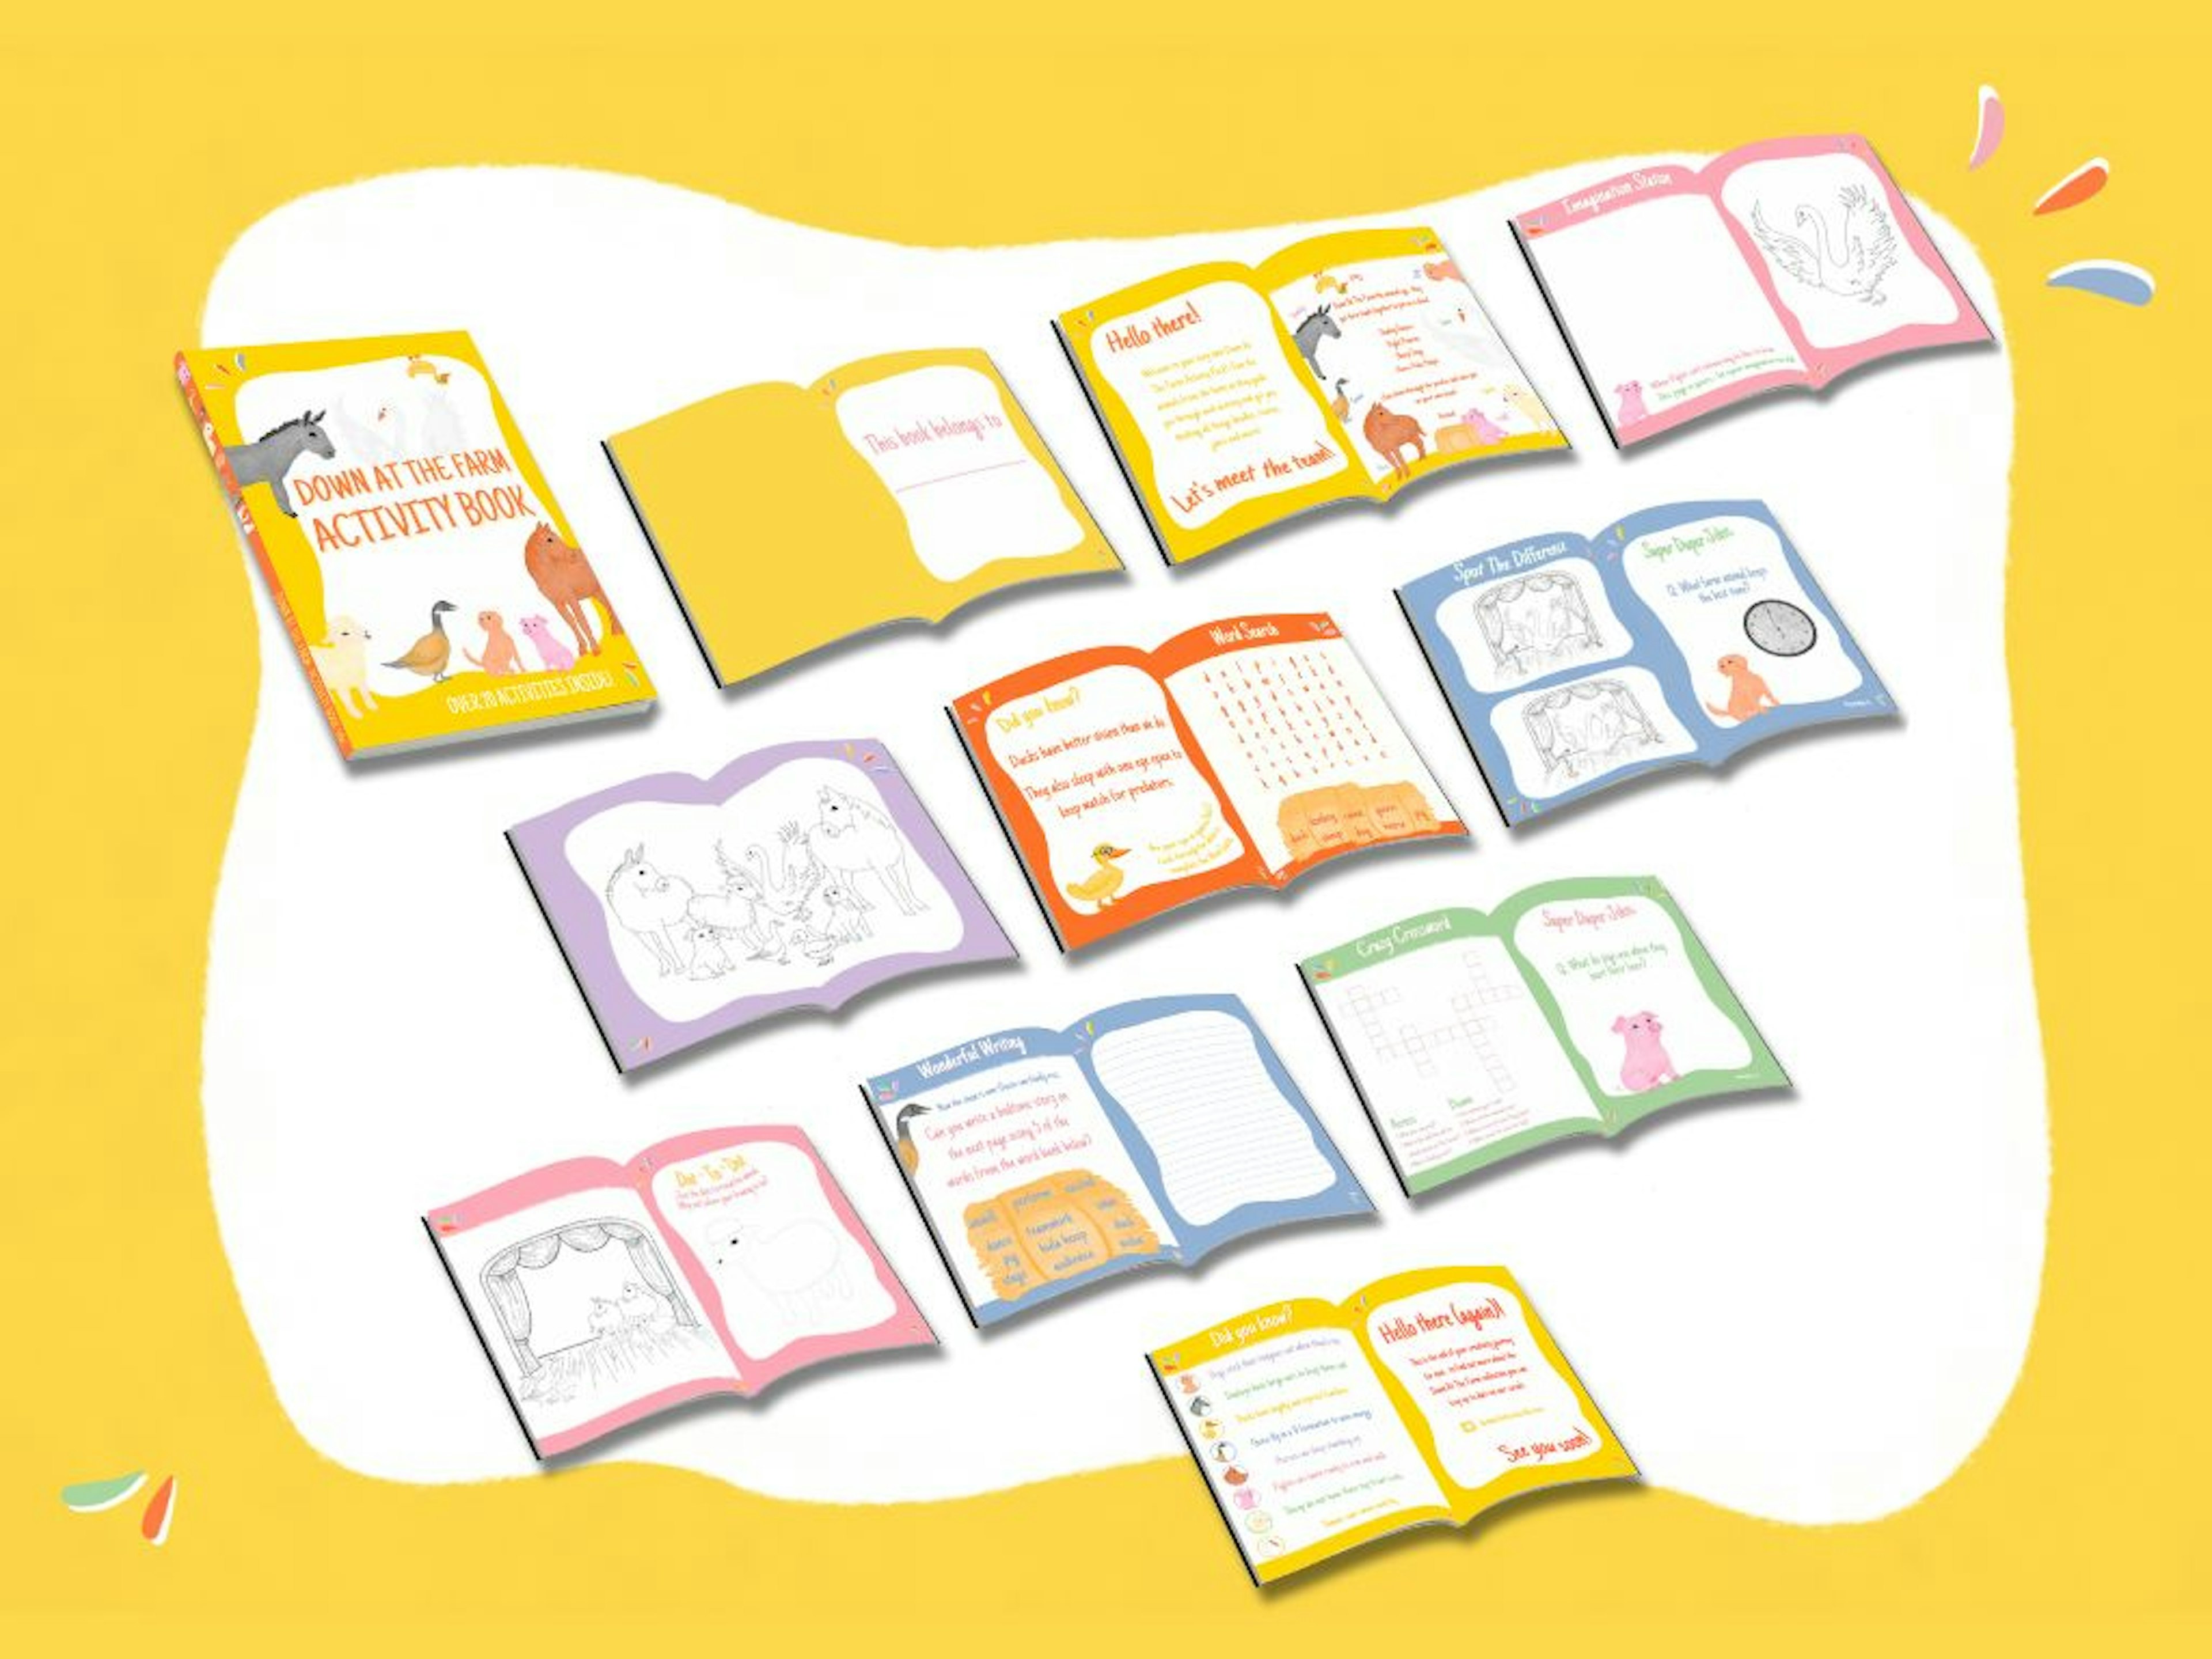 An activity pack with a purpose of educating as well as creating. With bold colours and consistency in the participation of familiar characters, the engagement is heightened. This is all about the journey and has a core value of teamwork.